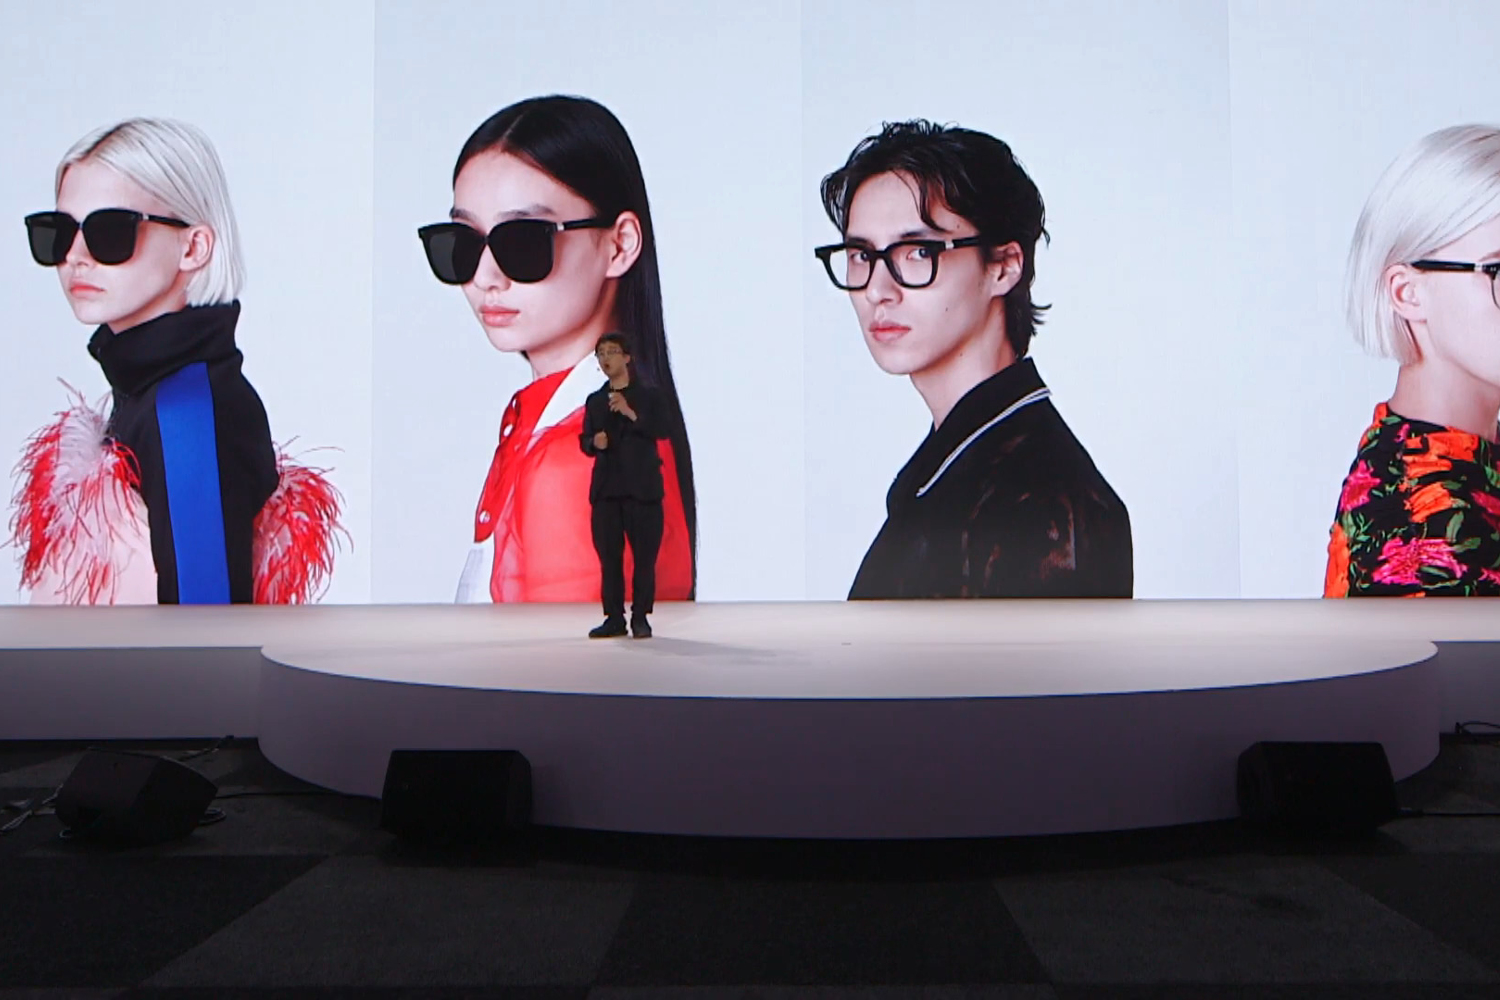 Huawei's Eyewear Smartglasses Are All About Style | Digital Trends